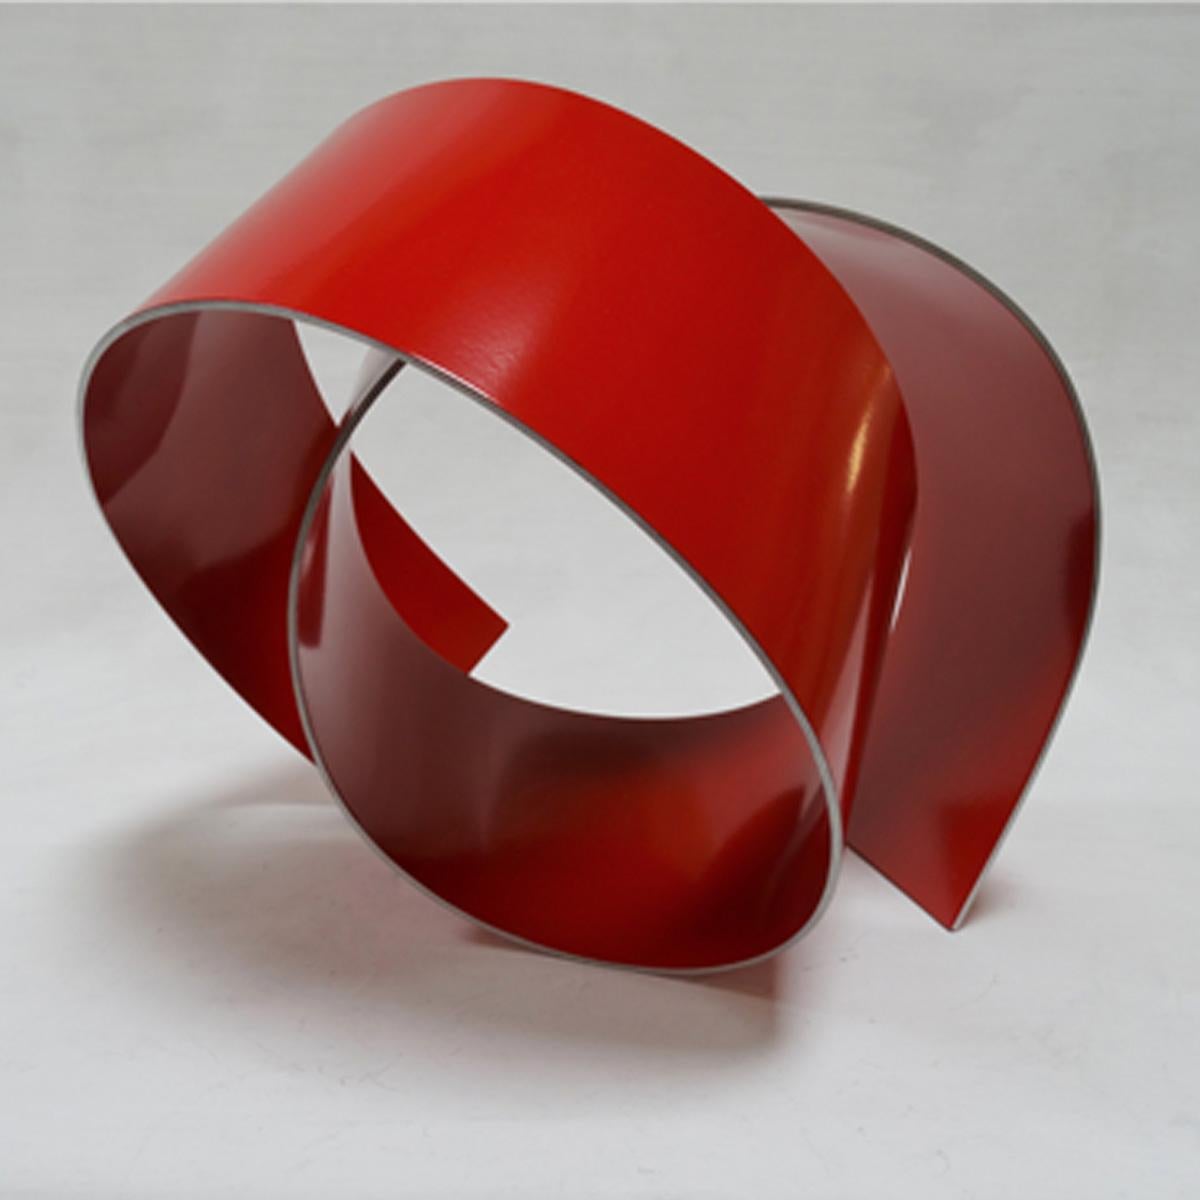 Línies 28 - Abstract, Outdoor Sculpture, Contemporary, Art, Red, Rafael Amorós For Sale 4